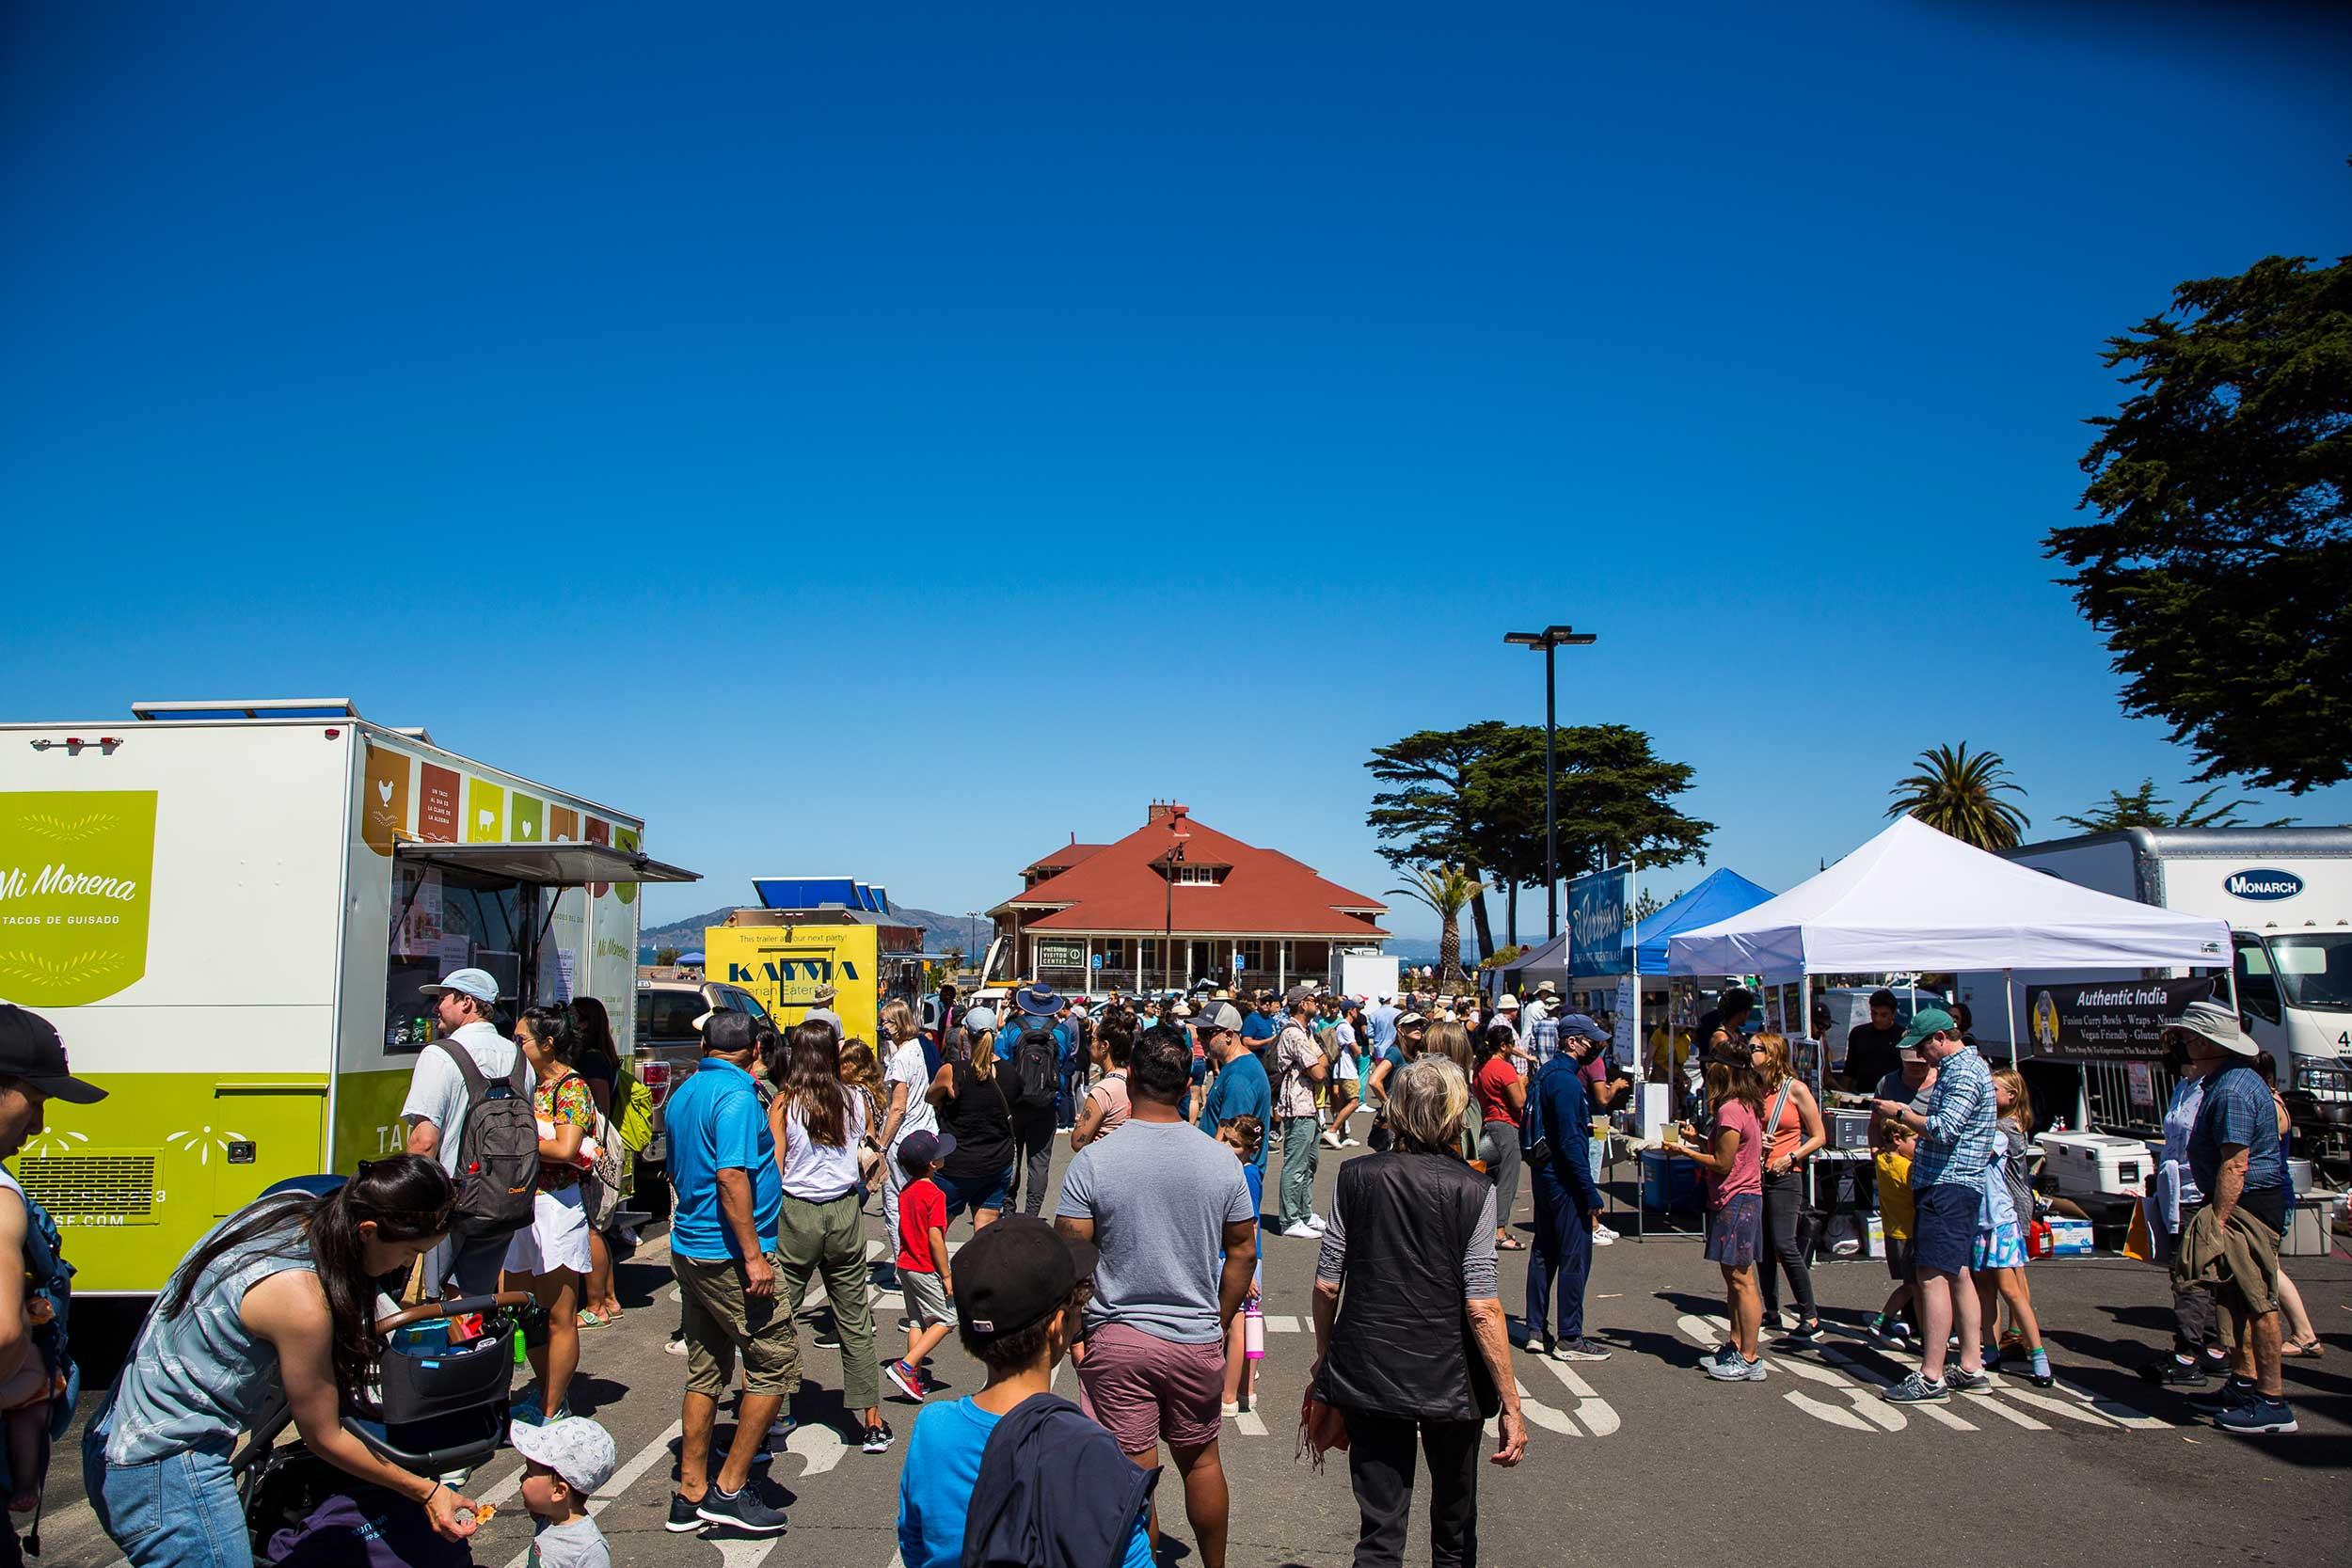 Trucks and people gathered at the Presidio Pop Up.